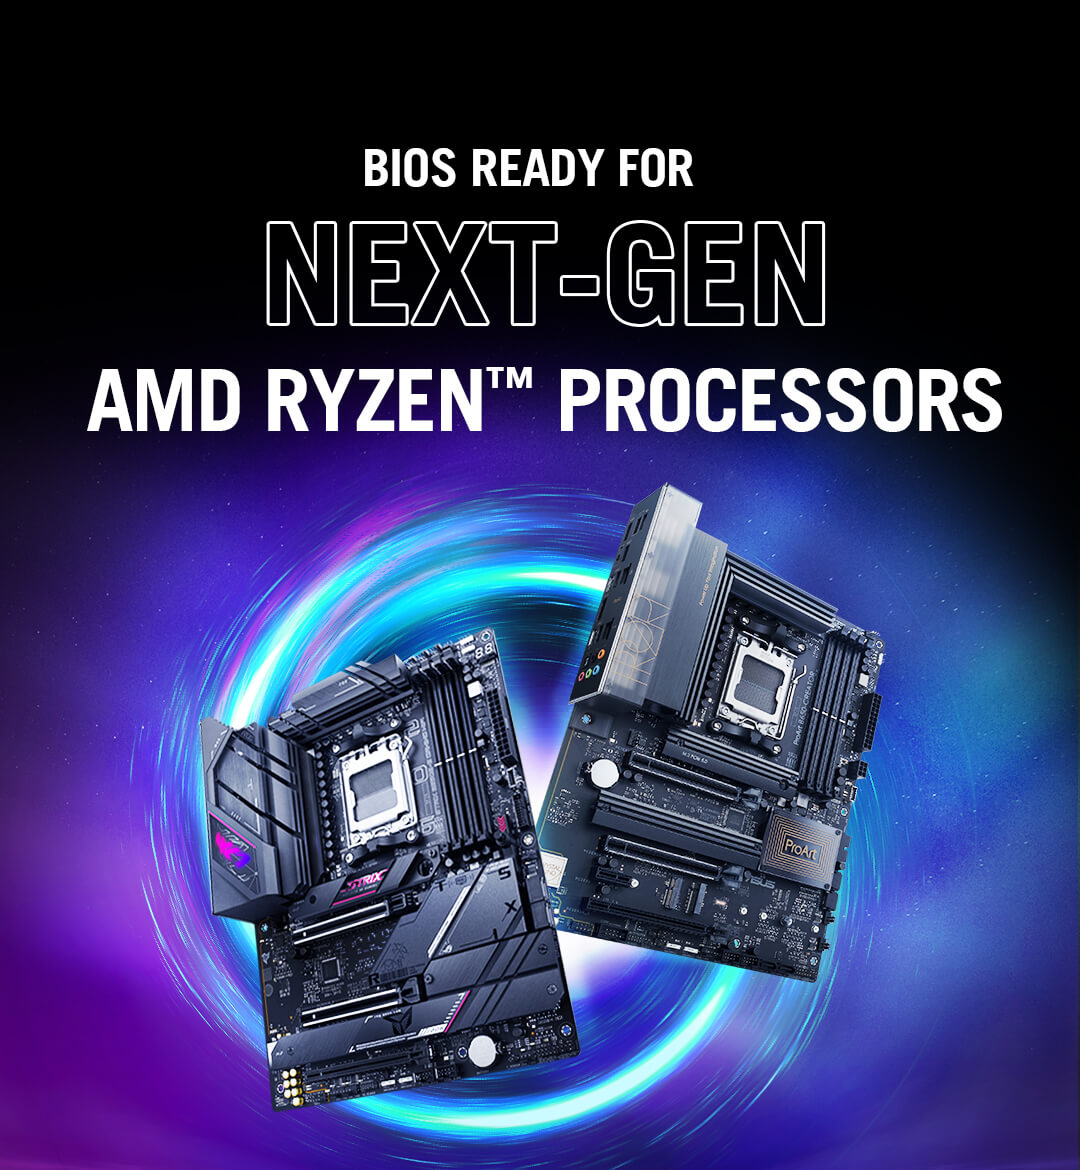 Two B650 motherboards image with BIOS Ready for Next-Gen AMD Ryzen™ Processors